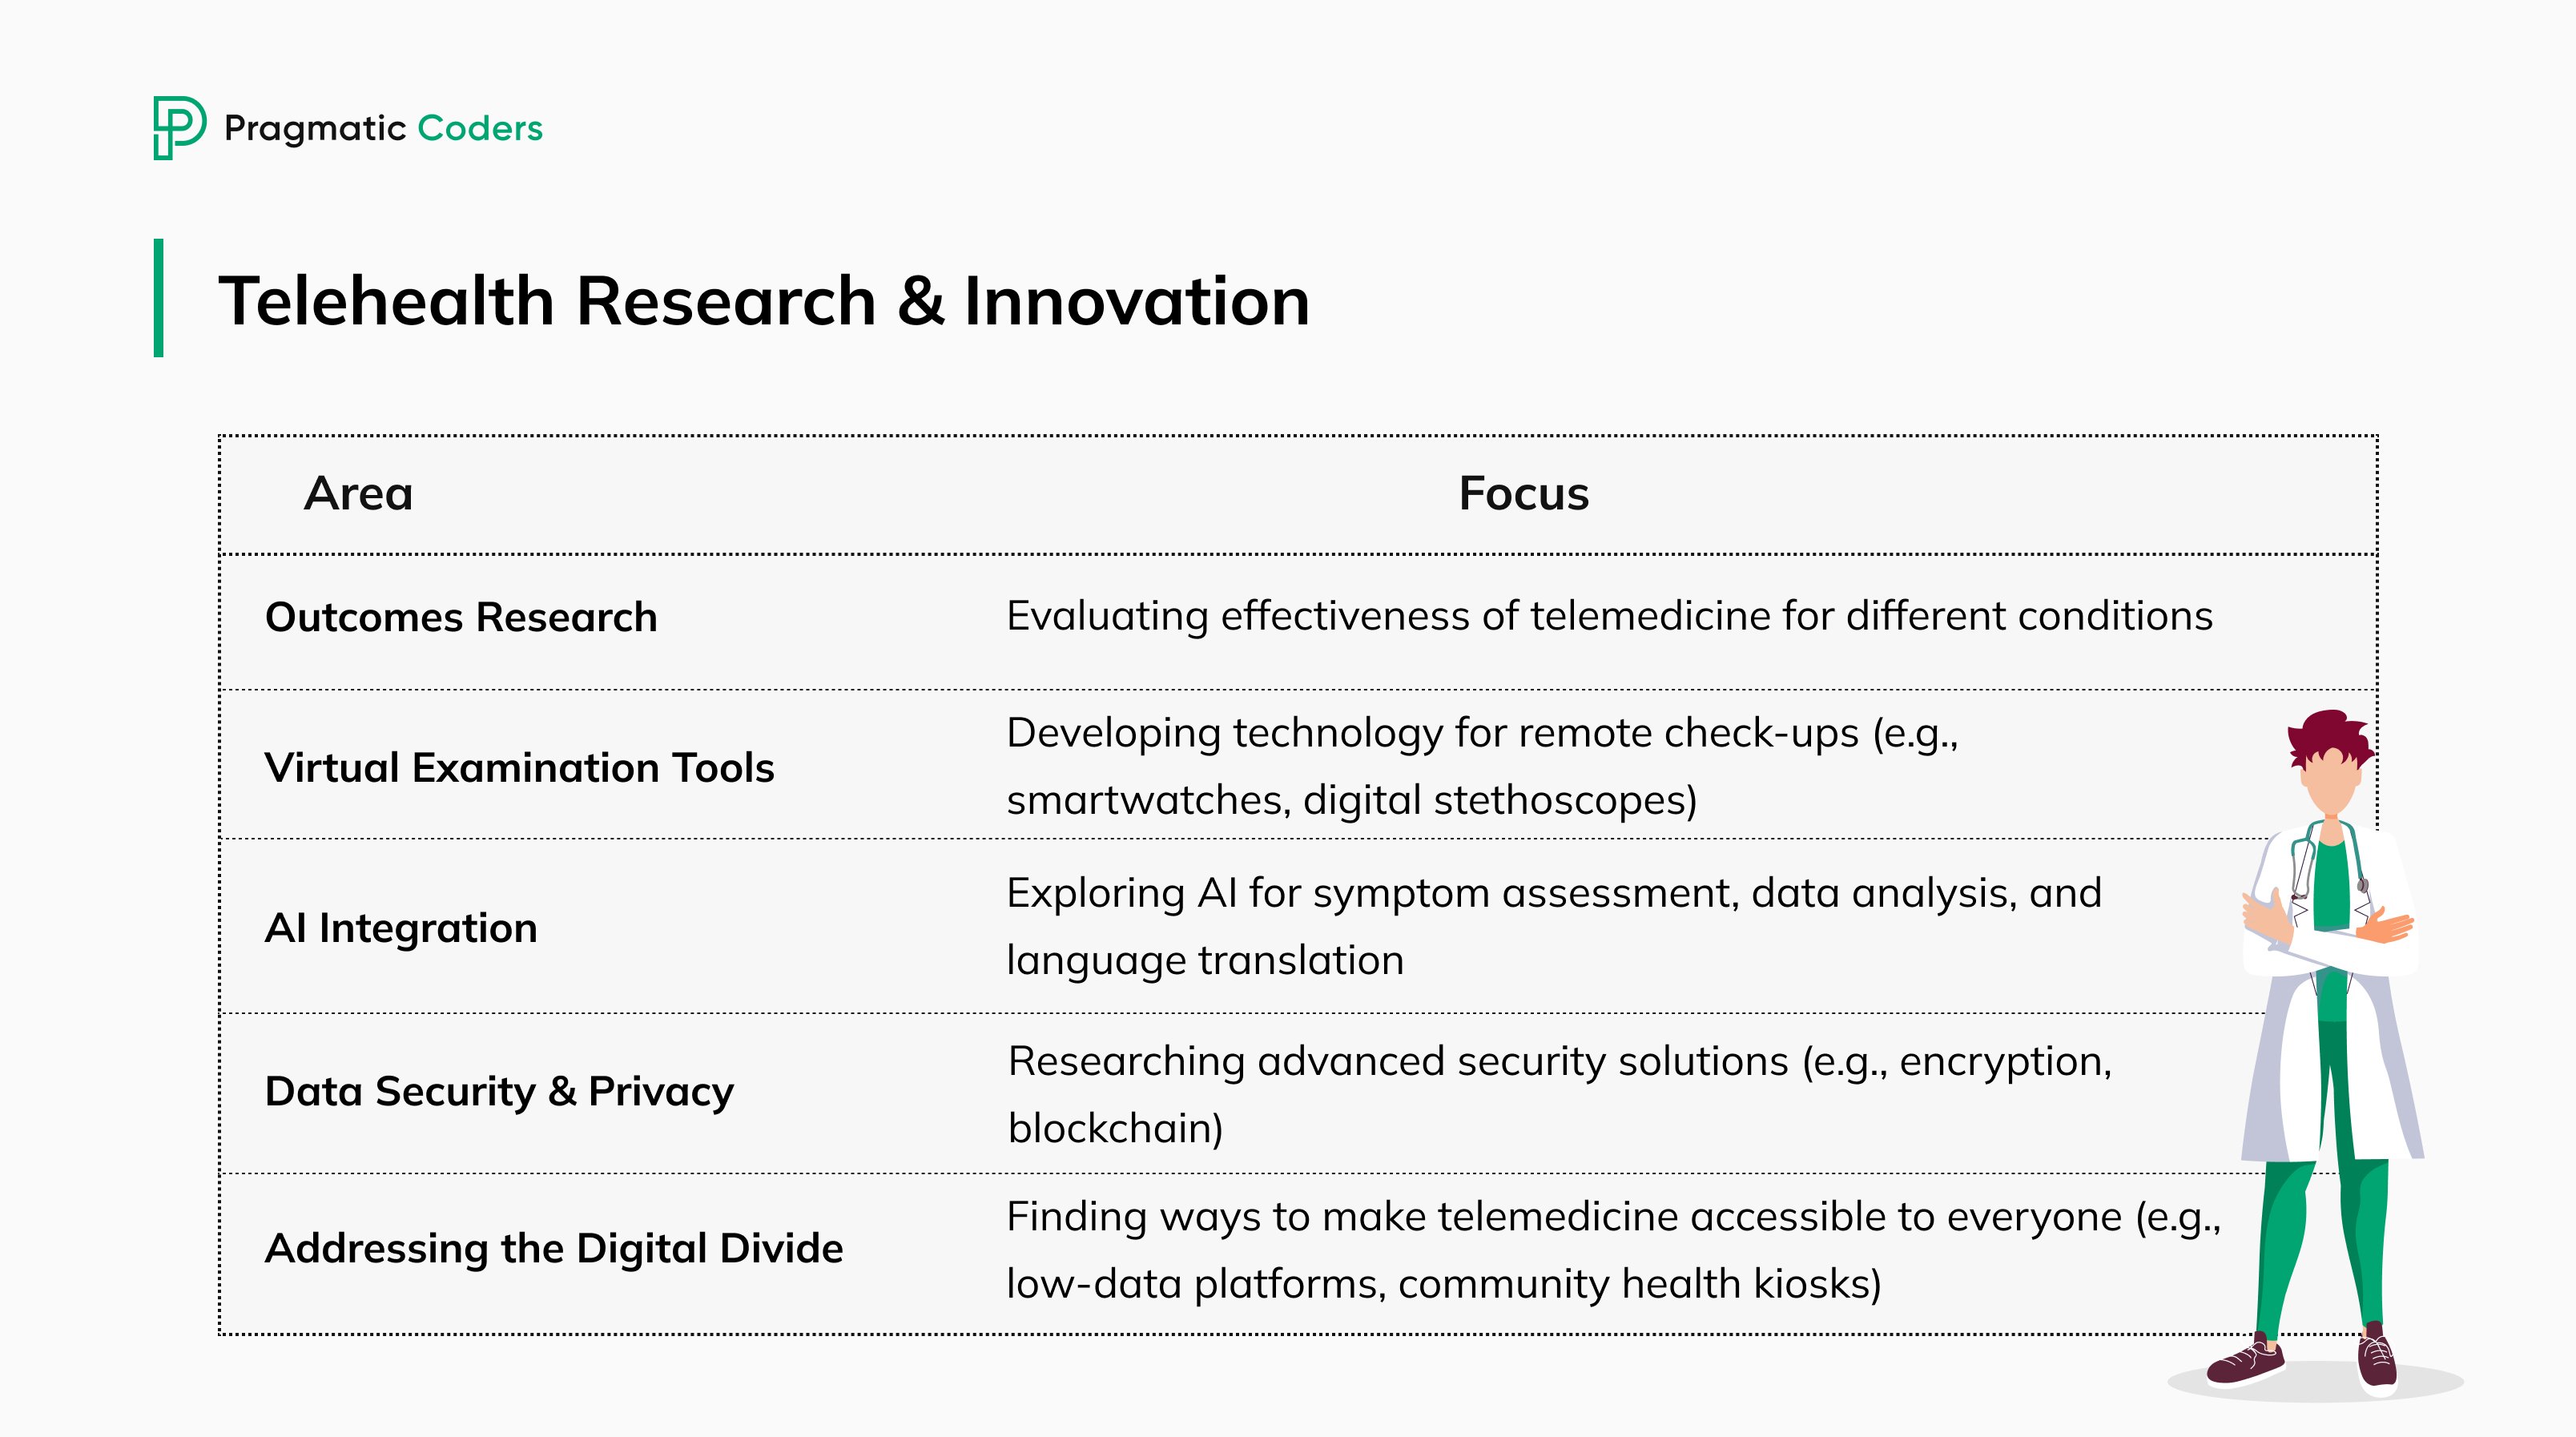 Areas for Telehealth Research & Innovation